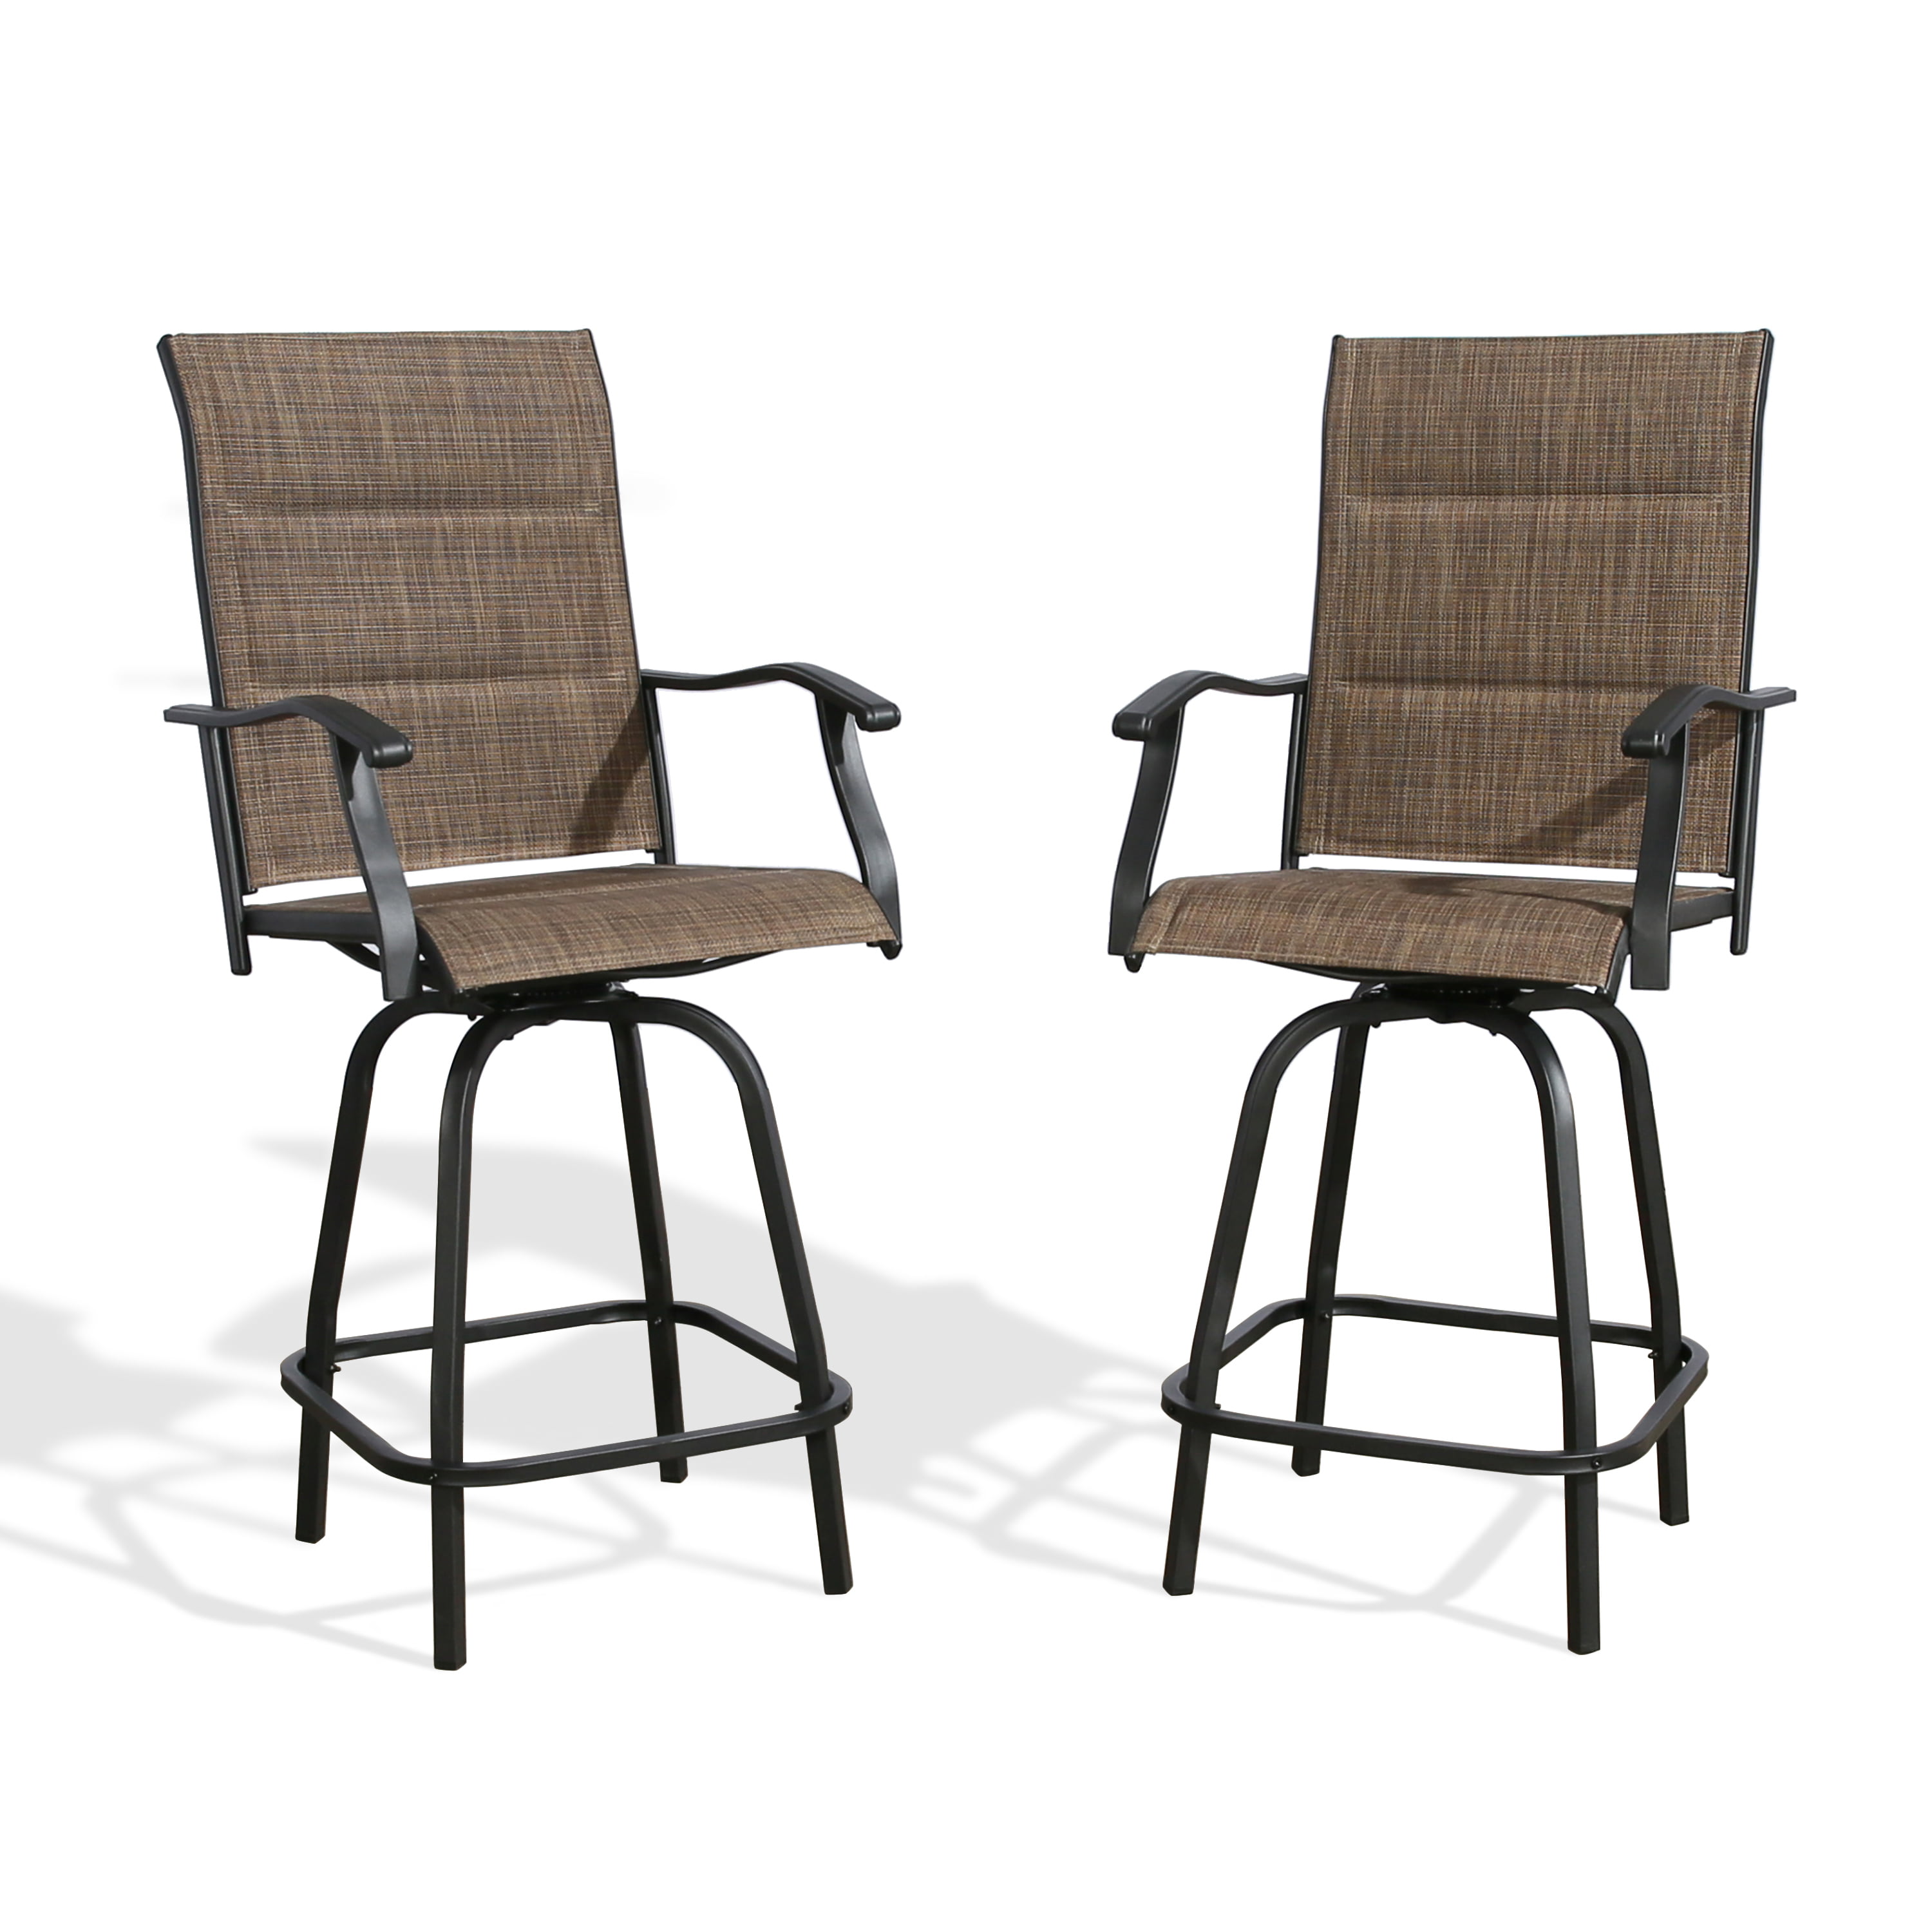 Ulax furniture Outdoor 2-Piece Swivel Bar Stools Height Patio Chairs